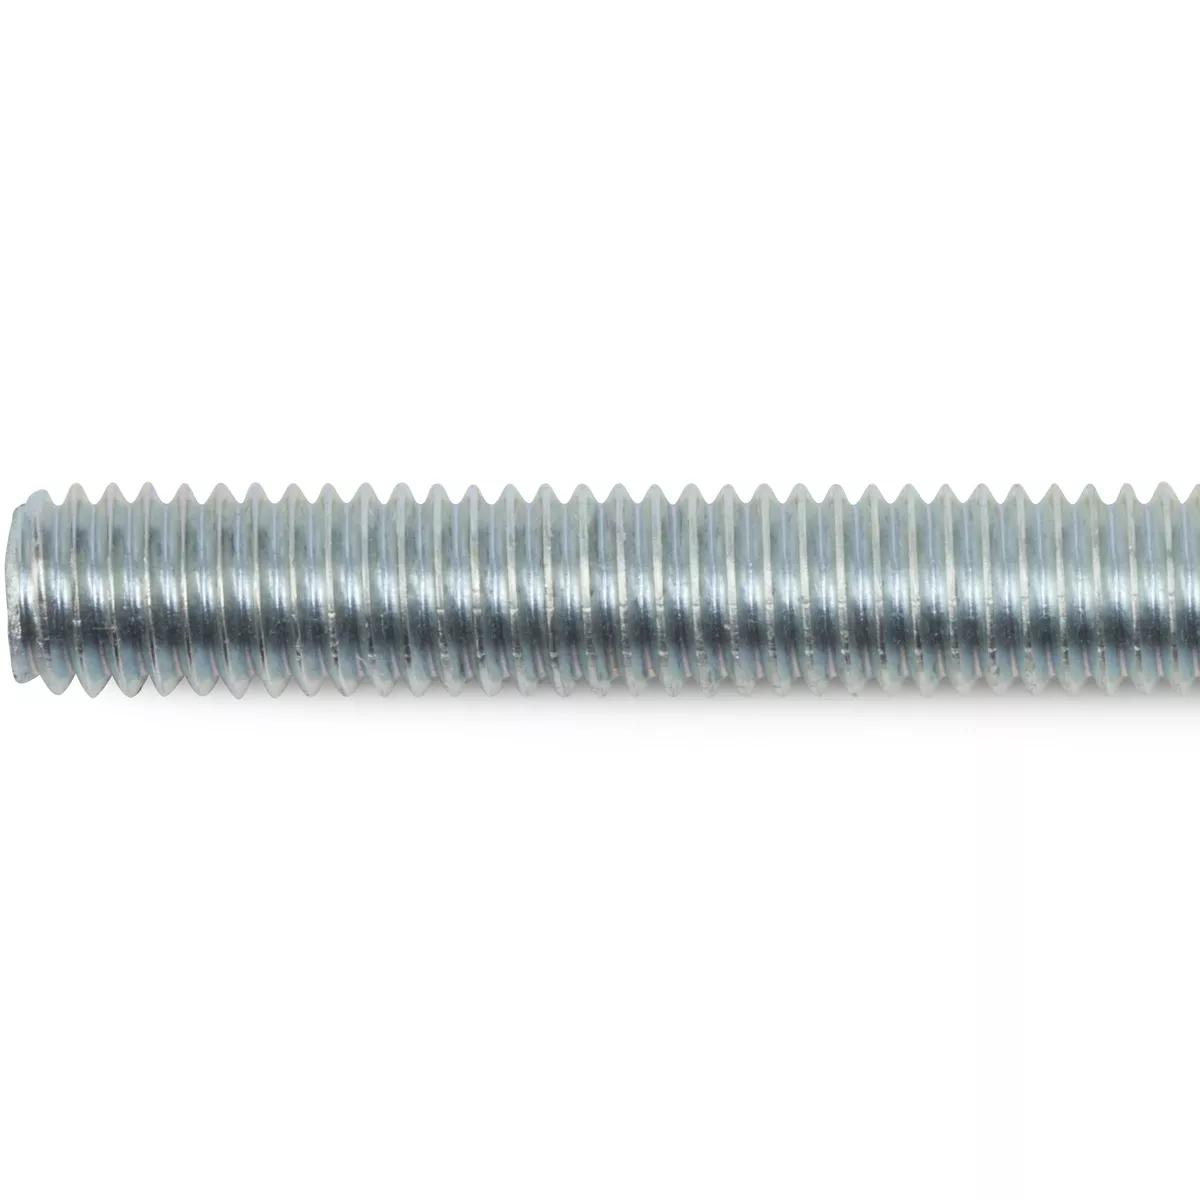 7/8"-14 x 36" Low Carbon Steel (SAE) Threaded Rod